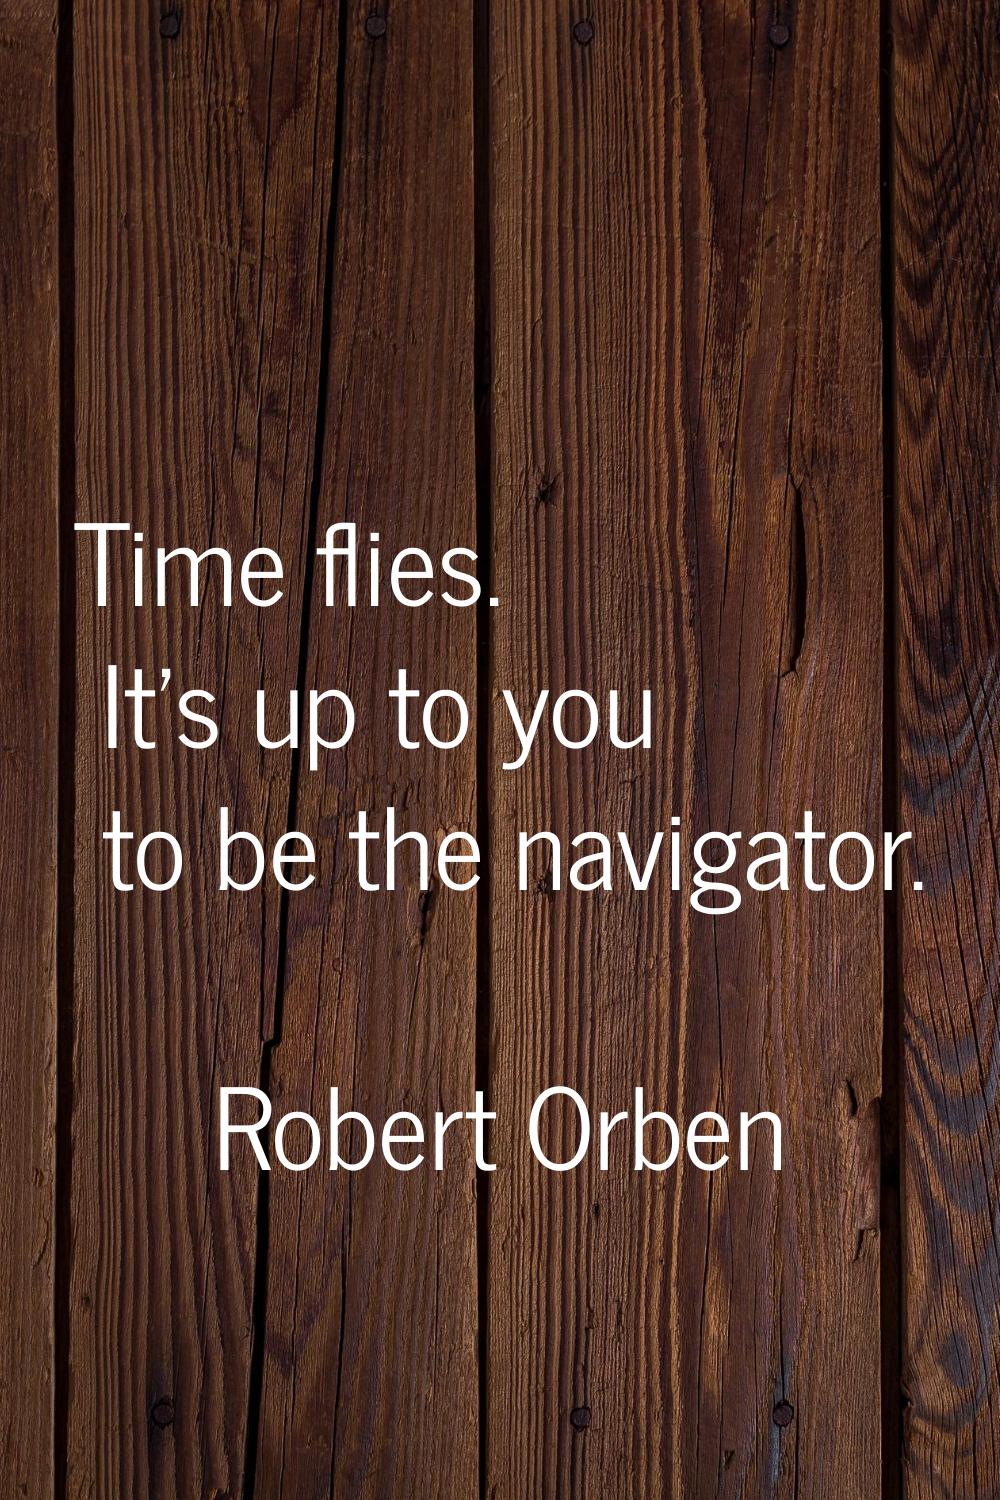 Time flies. It's up to you to be the navigator.